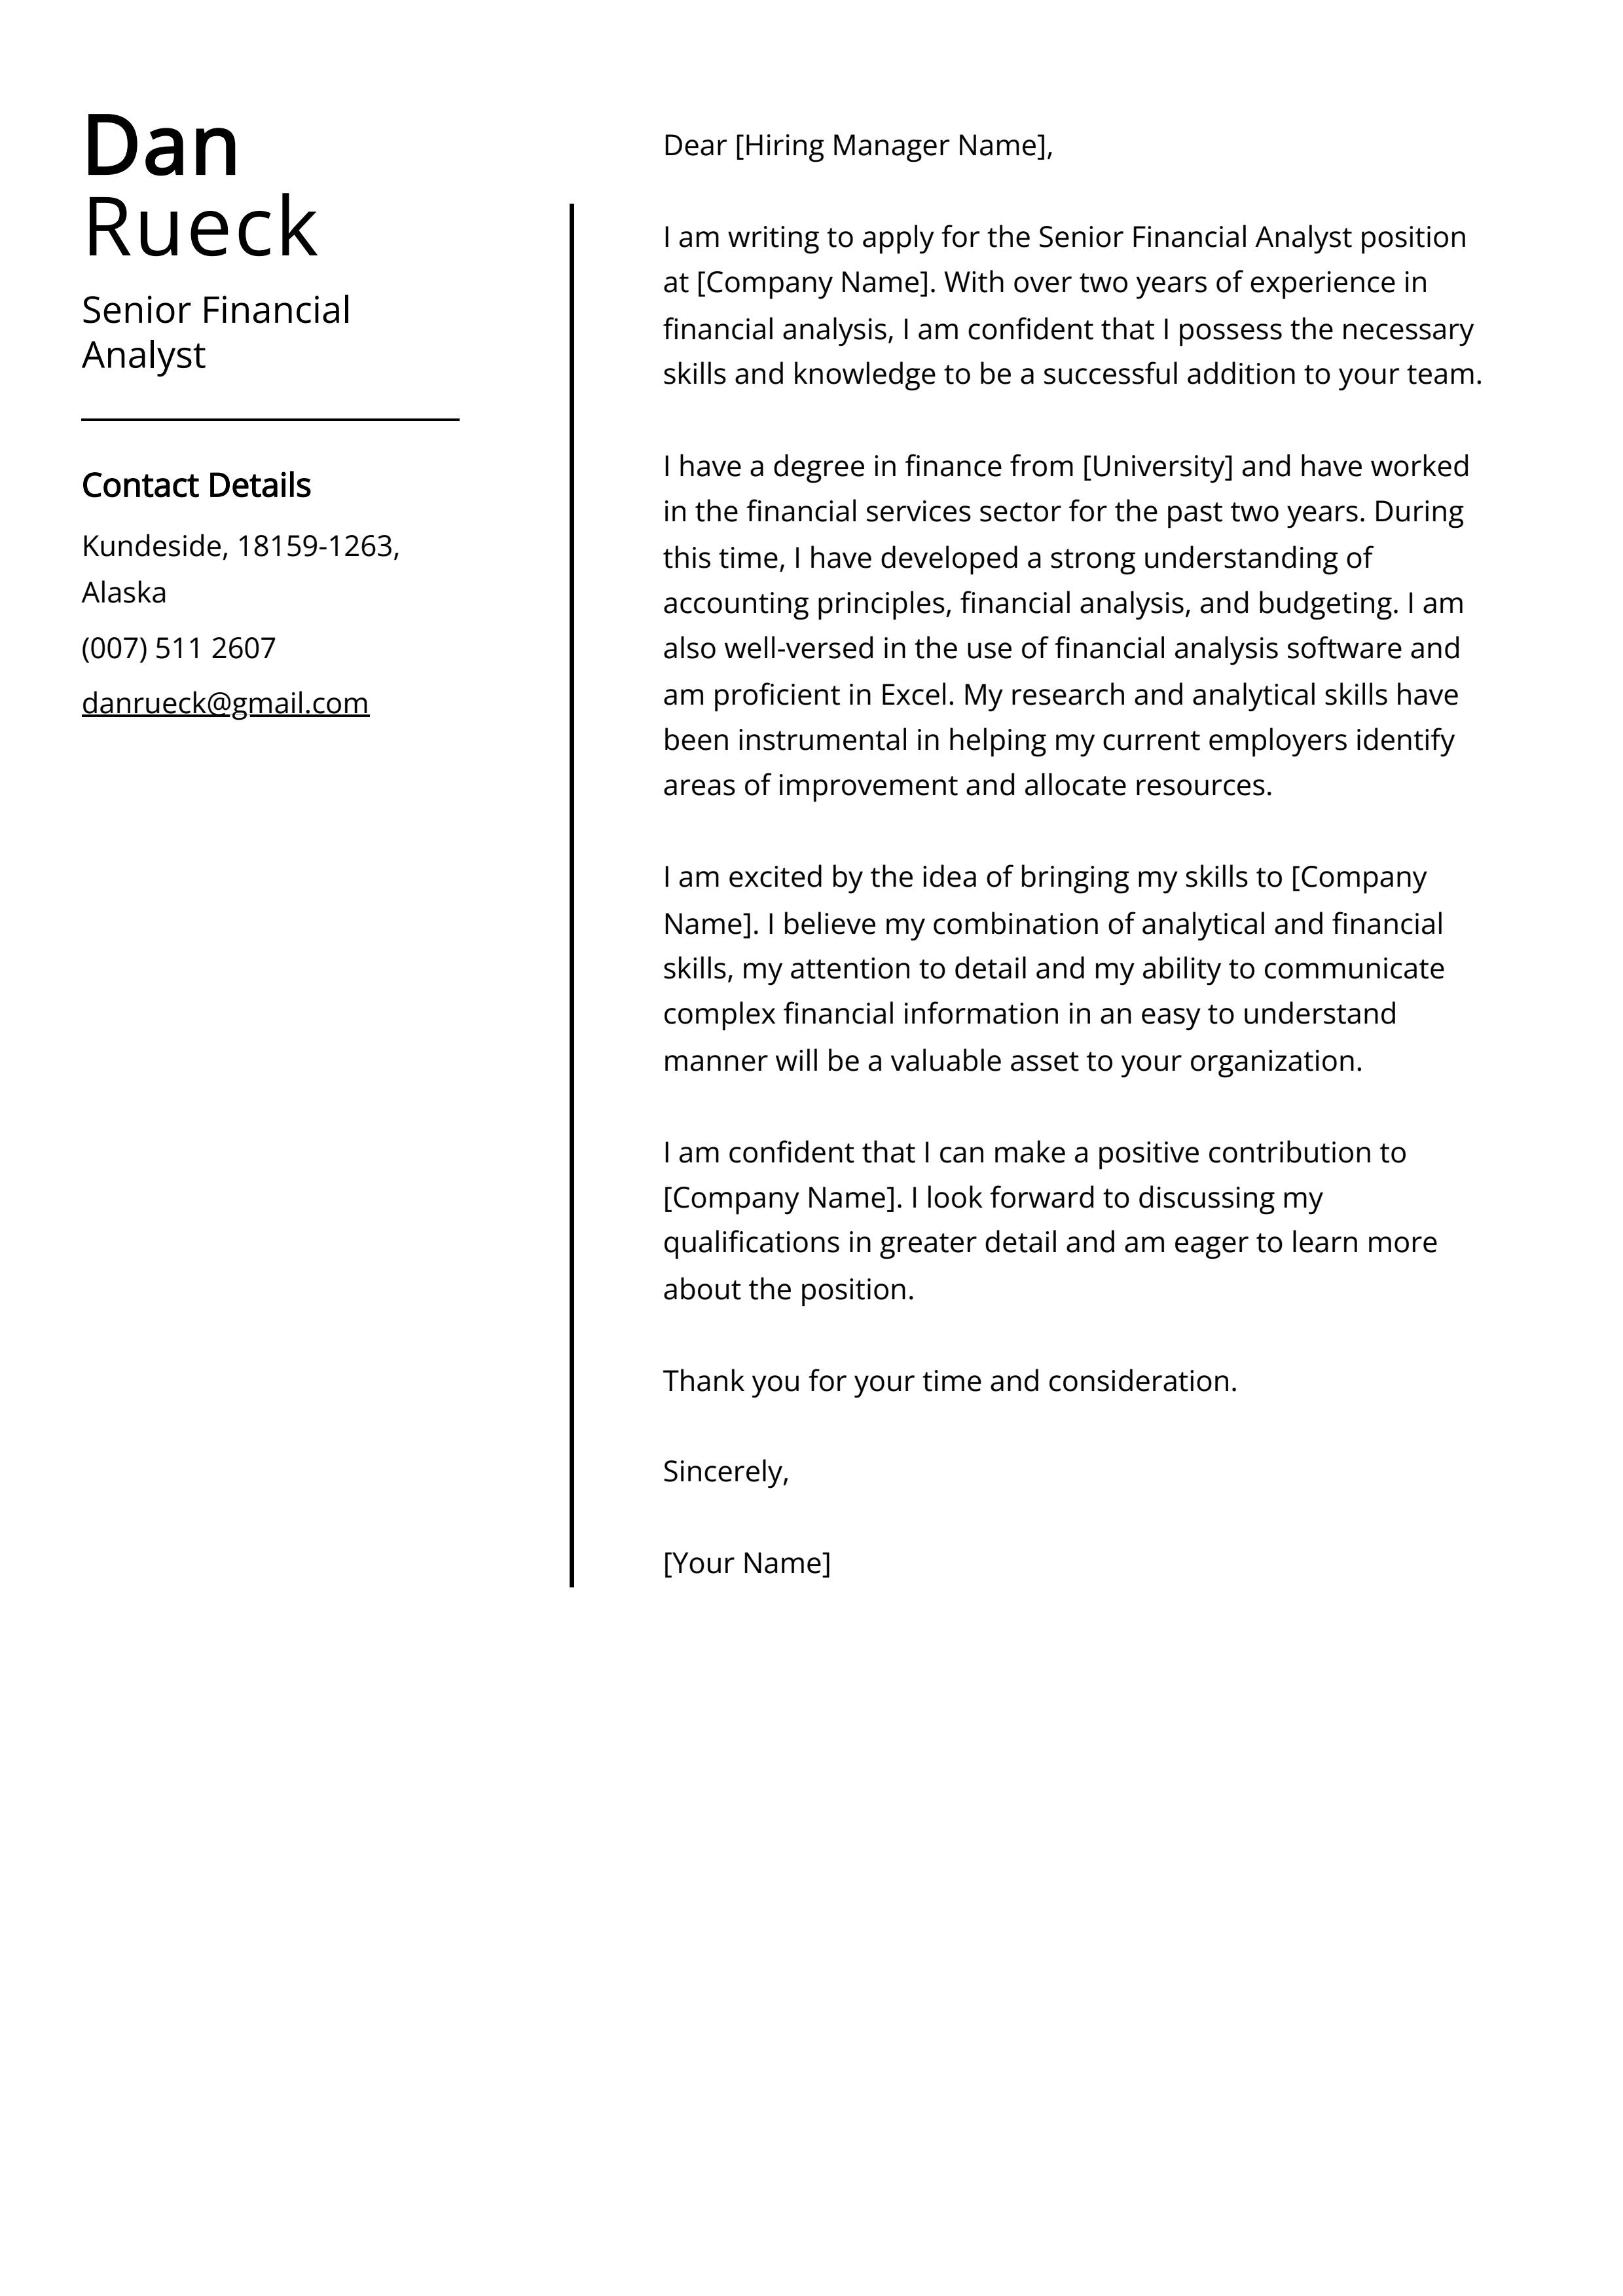 Senior Financial Analyst Cover Letter Example